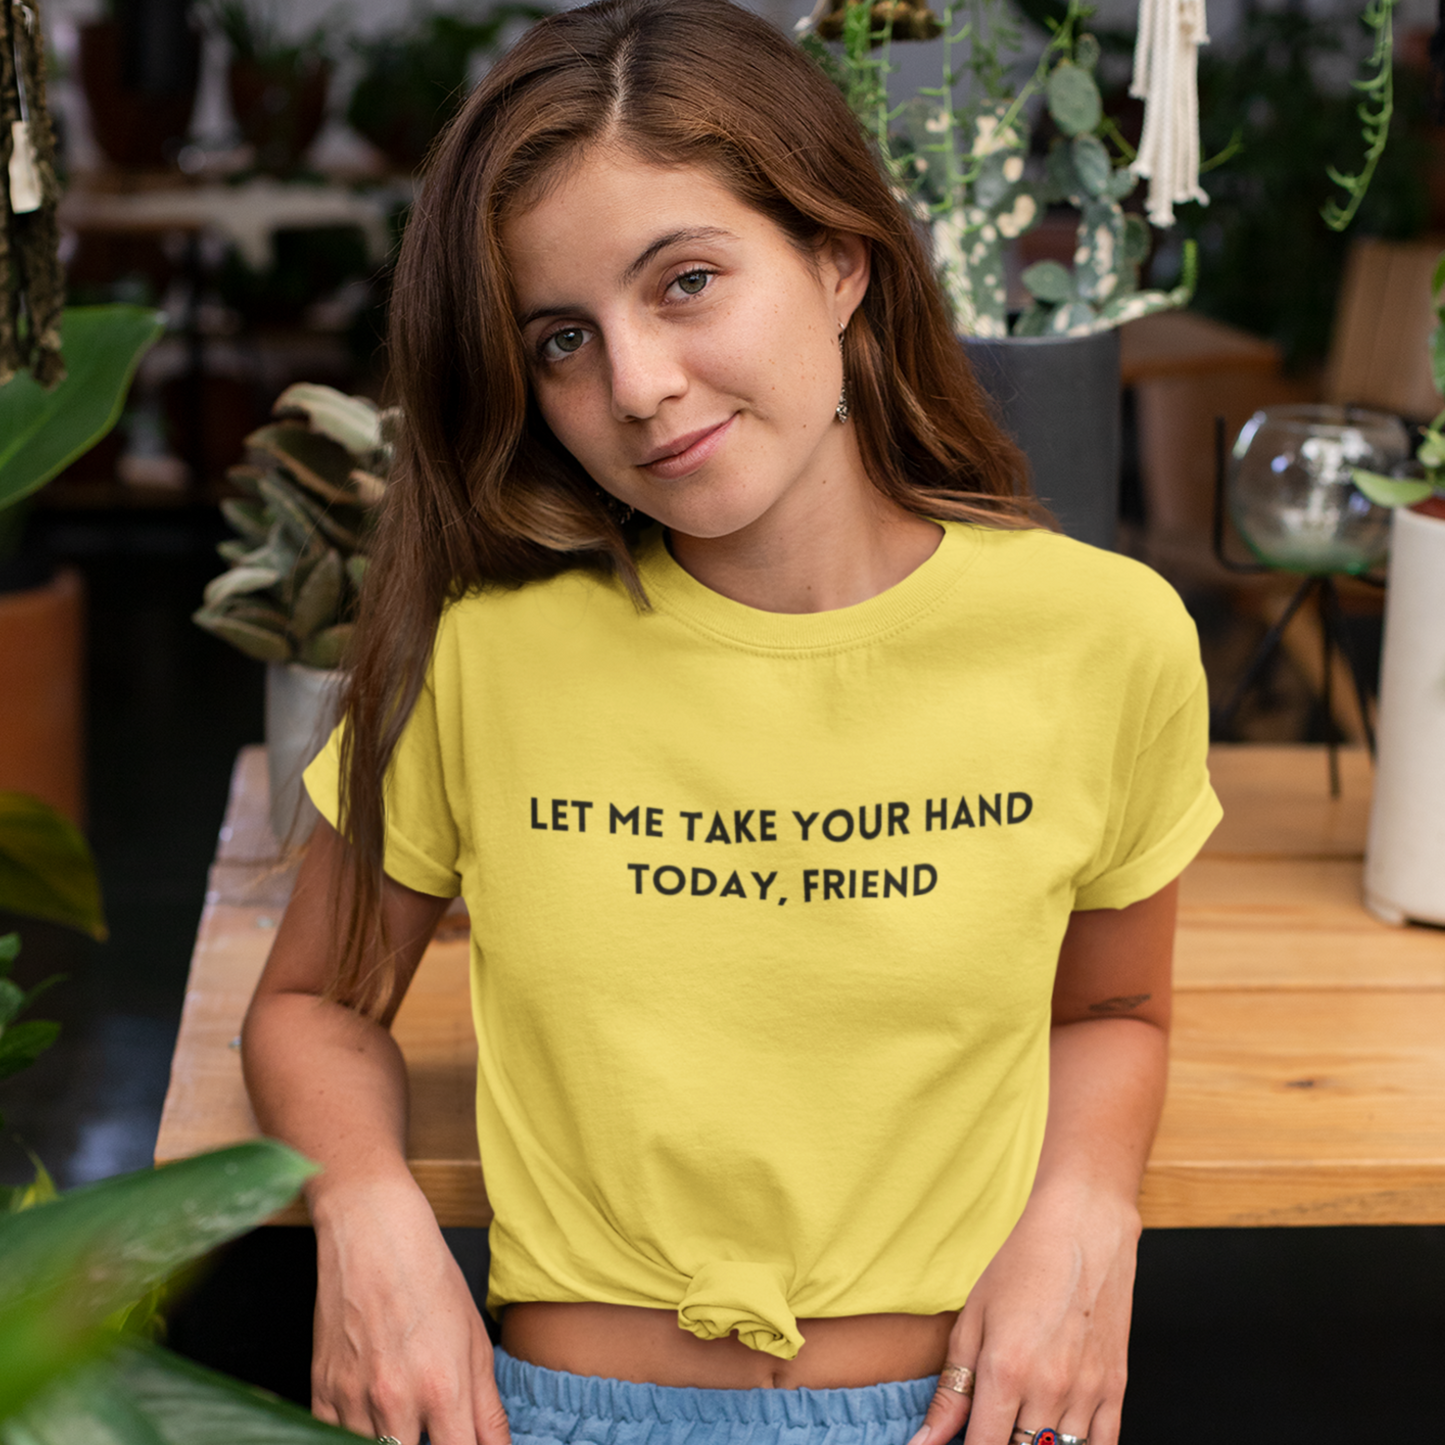 Let me take your hand today friend  Inspirational words t shirt  t shirt gift for caring friends self affirming words t shirt